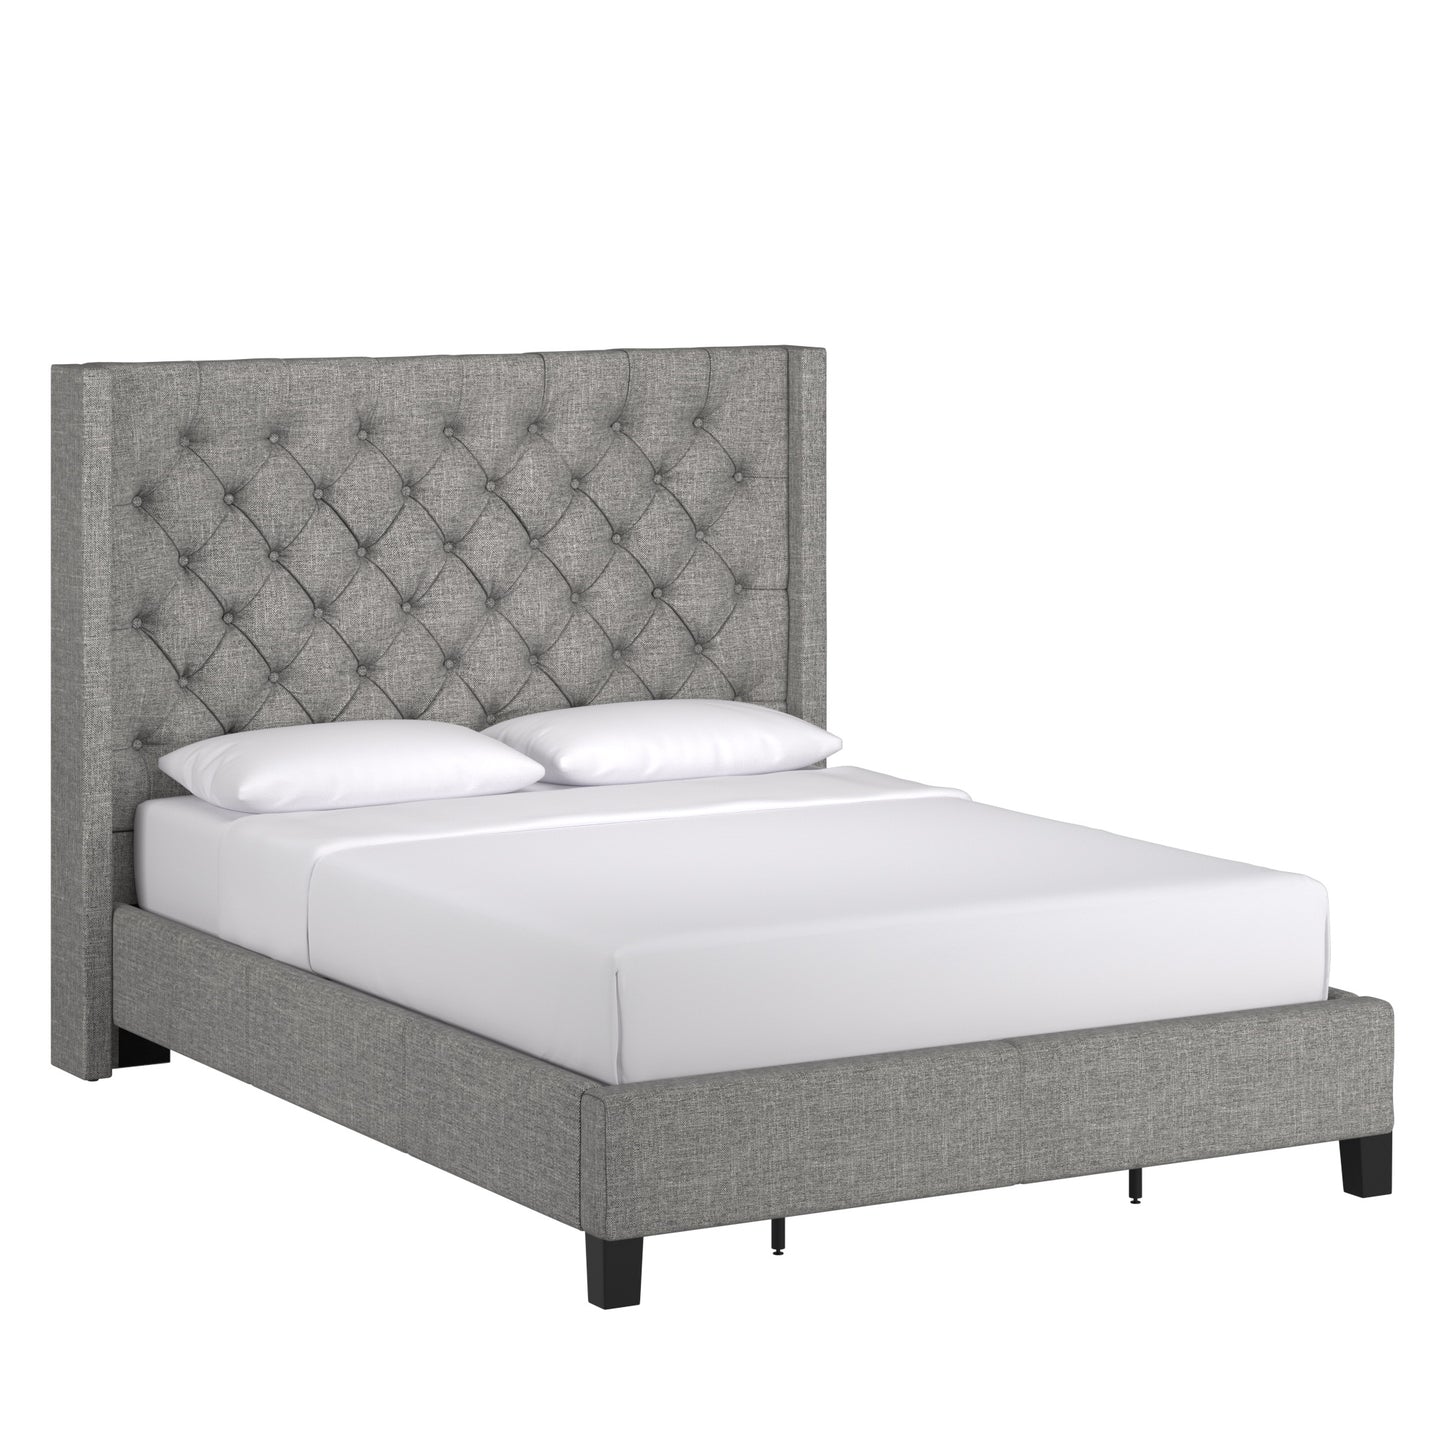 Wingback Button Tufted Bed - Grey Linen, Full